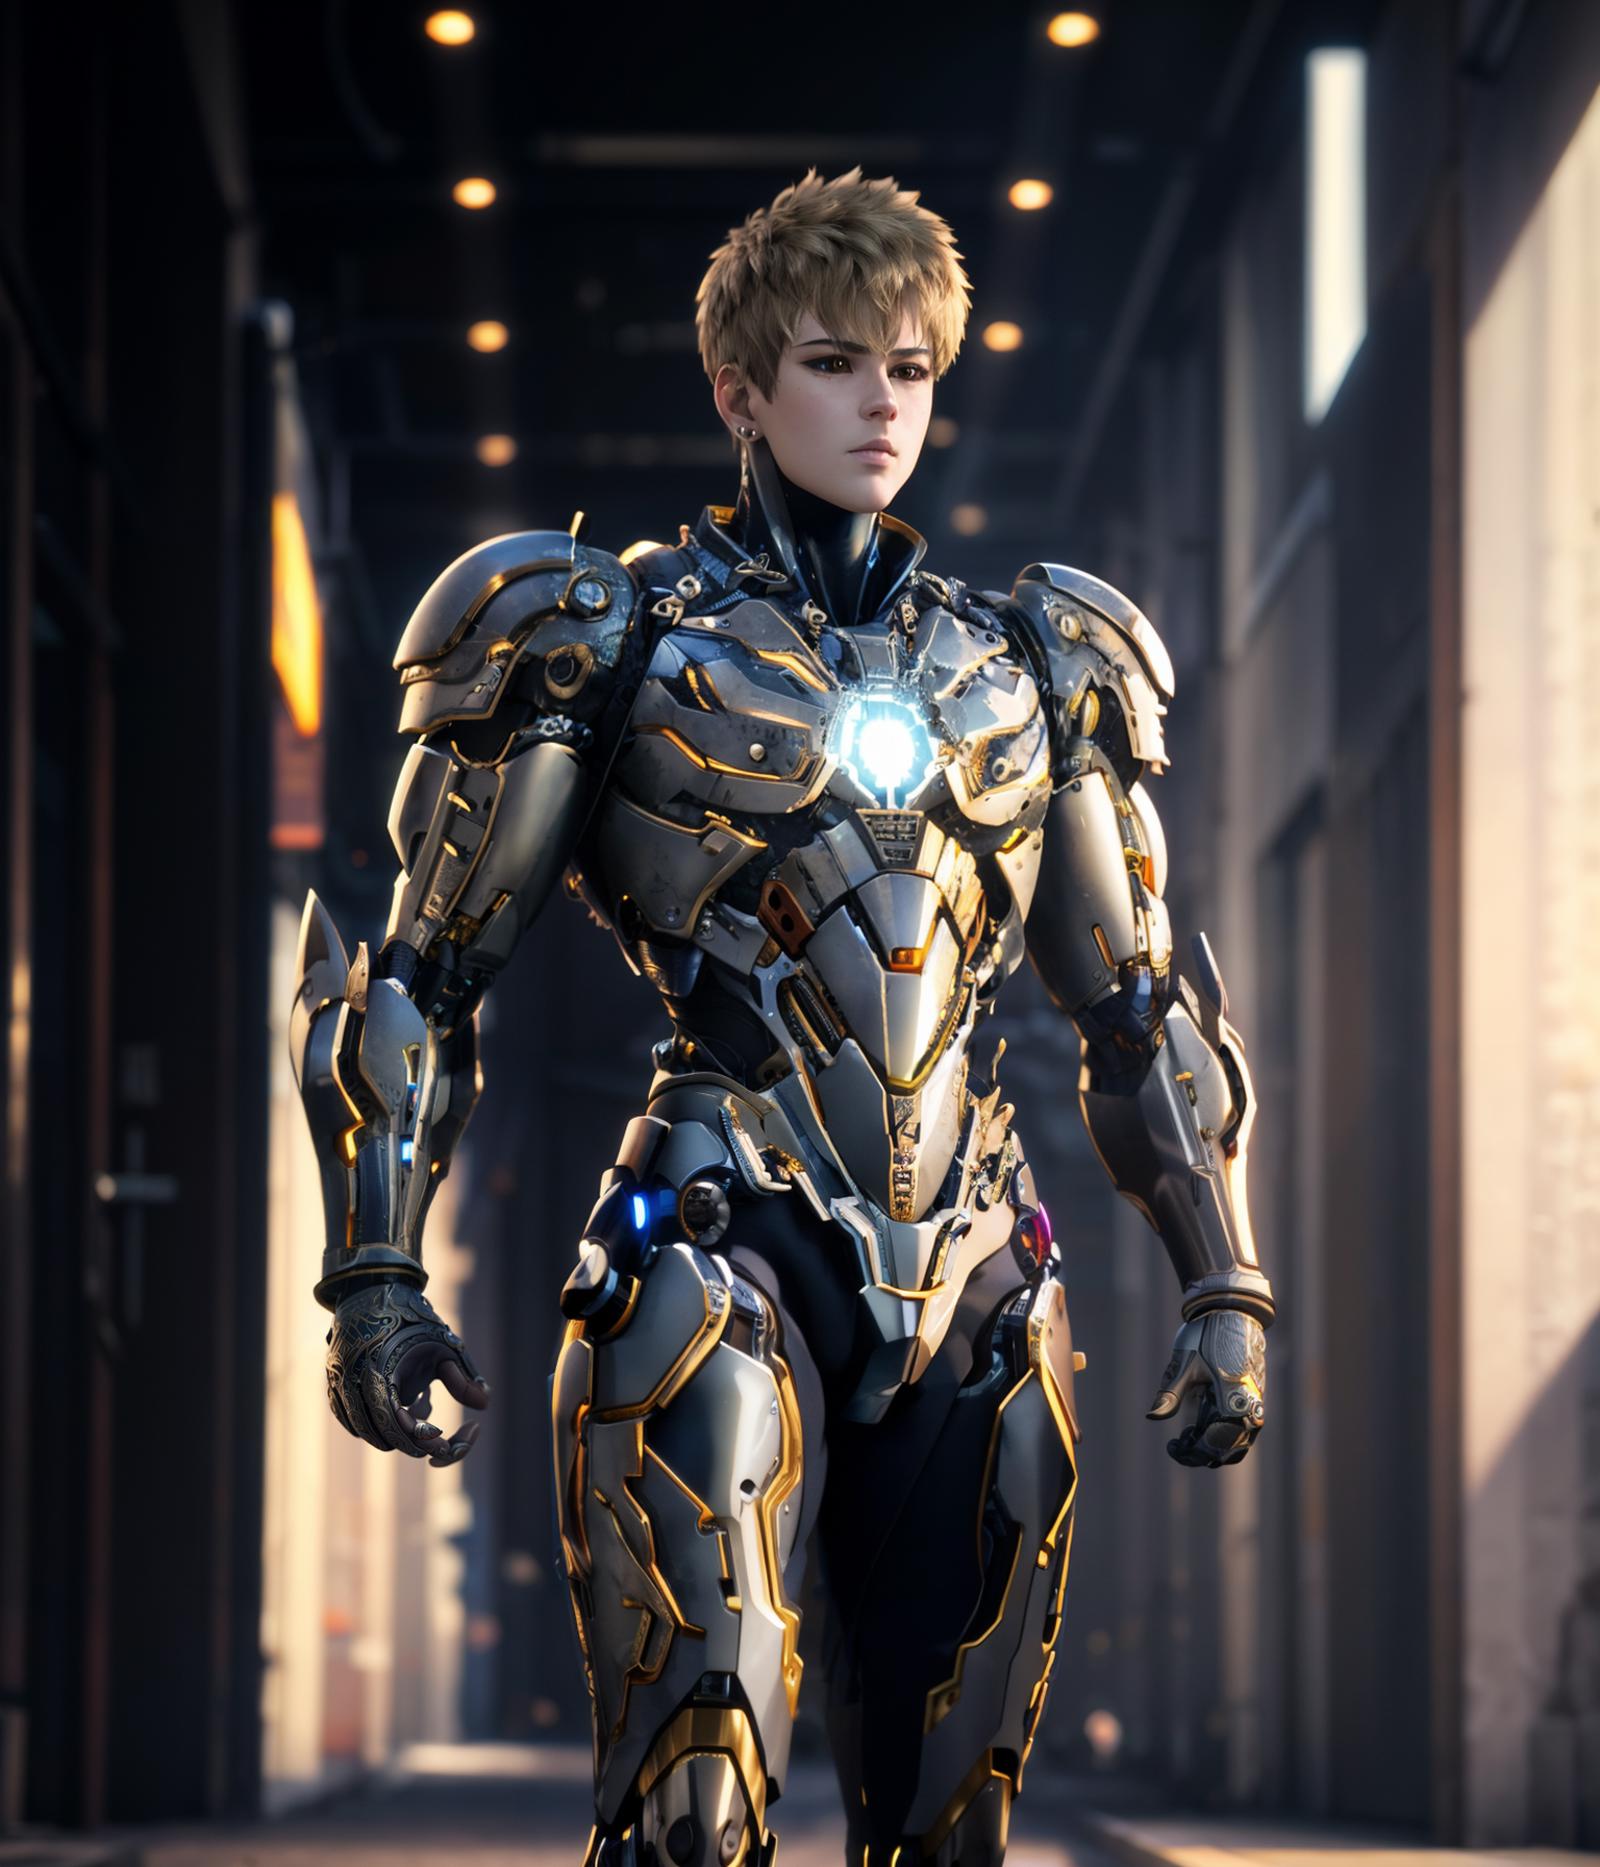 IronCatLoRA #6 - Genos | One Punch Man image by azenfone5366631